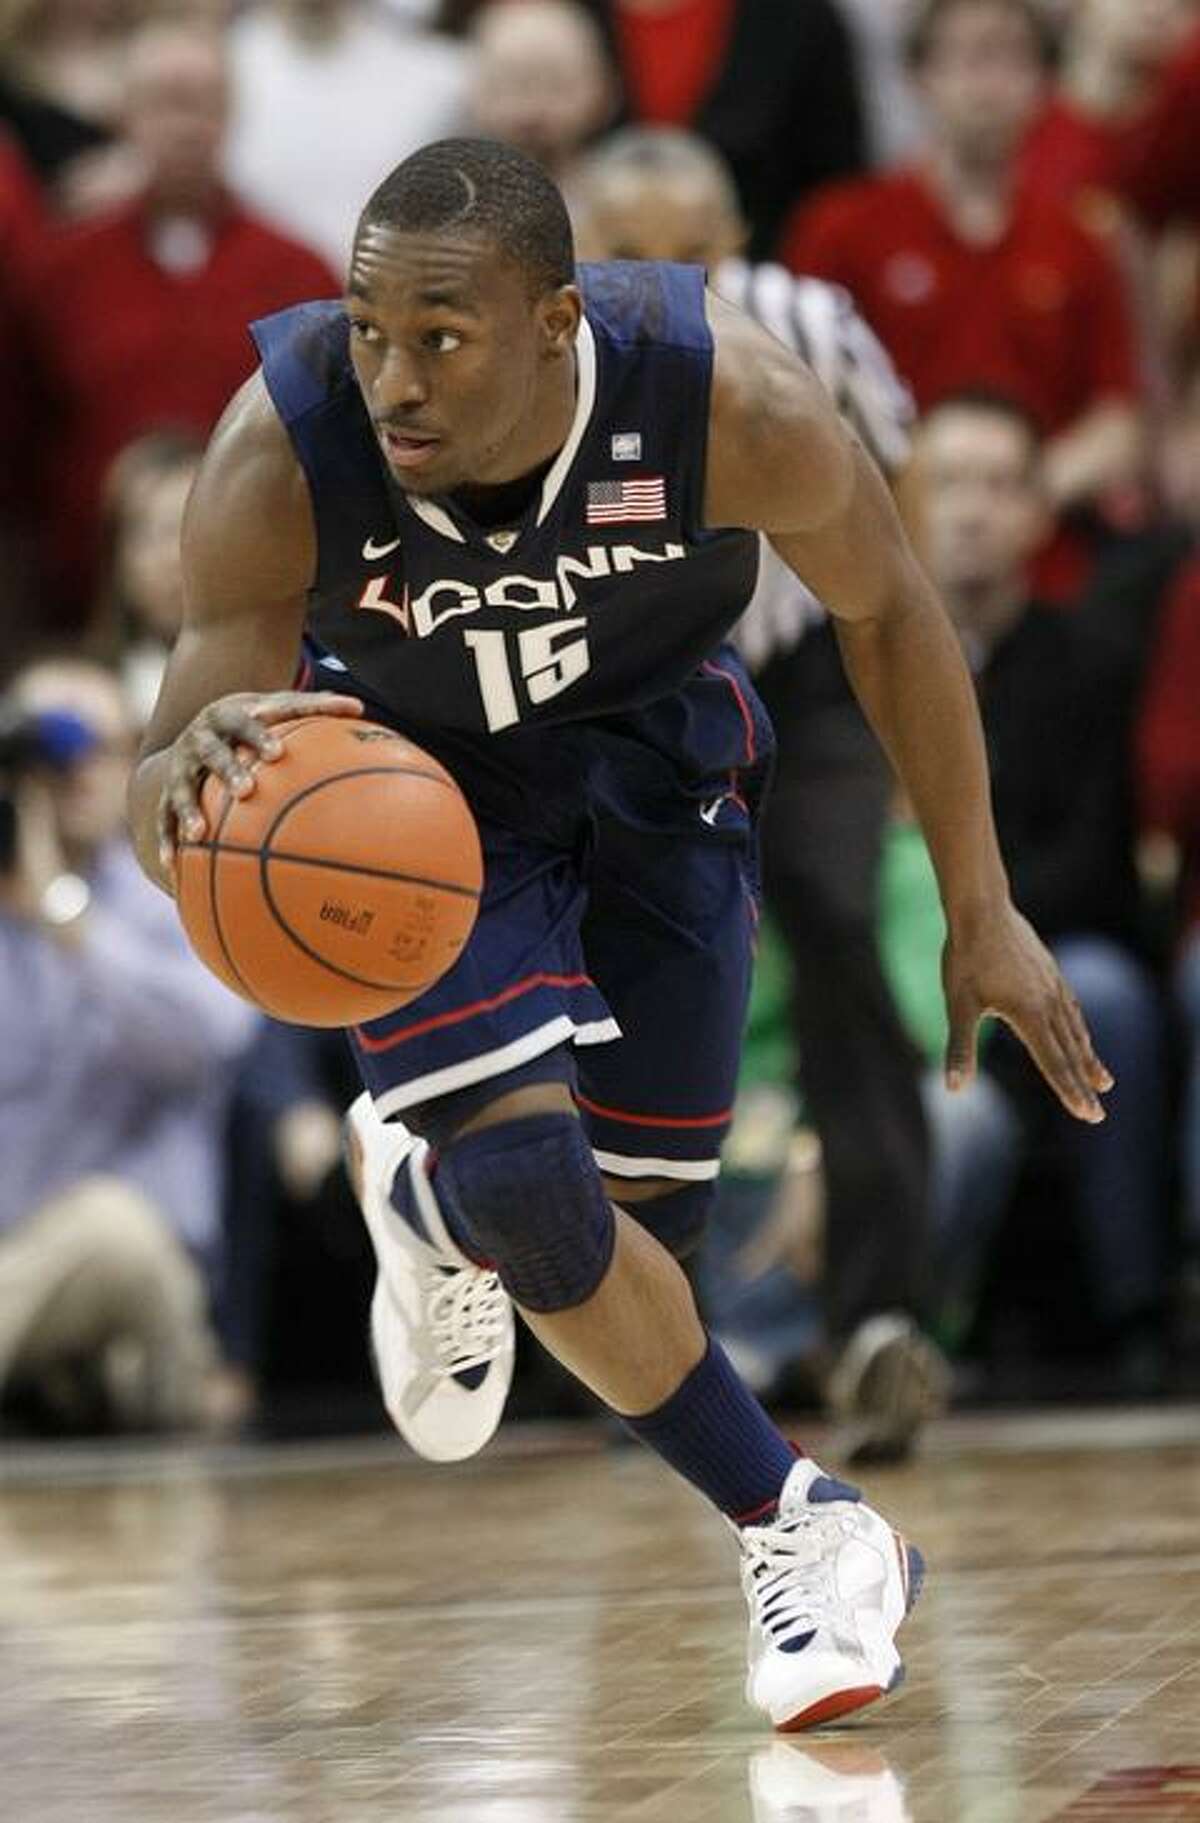 Connecticut 's Kemba Walker drives the ball upcourt during the first half of their NCAA college basketball game against Louisville in Louisville, Ky., Friday, Feb. 18, 2011. (AP Photo/Ed Reinke)